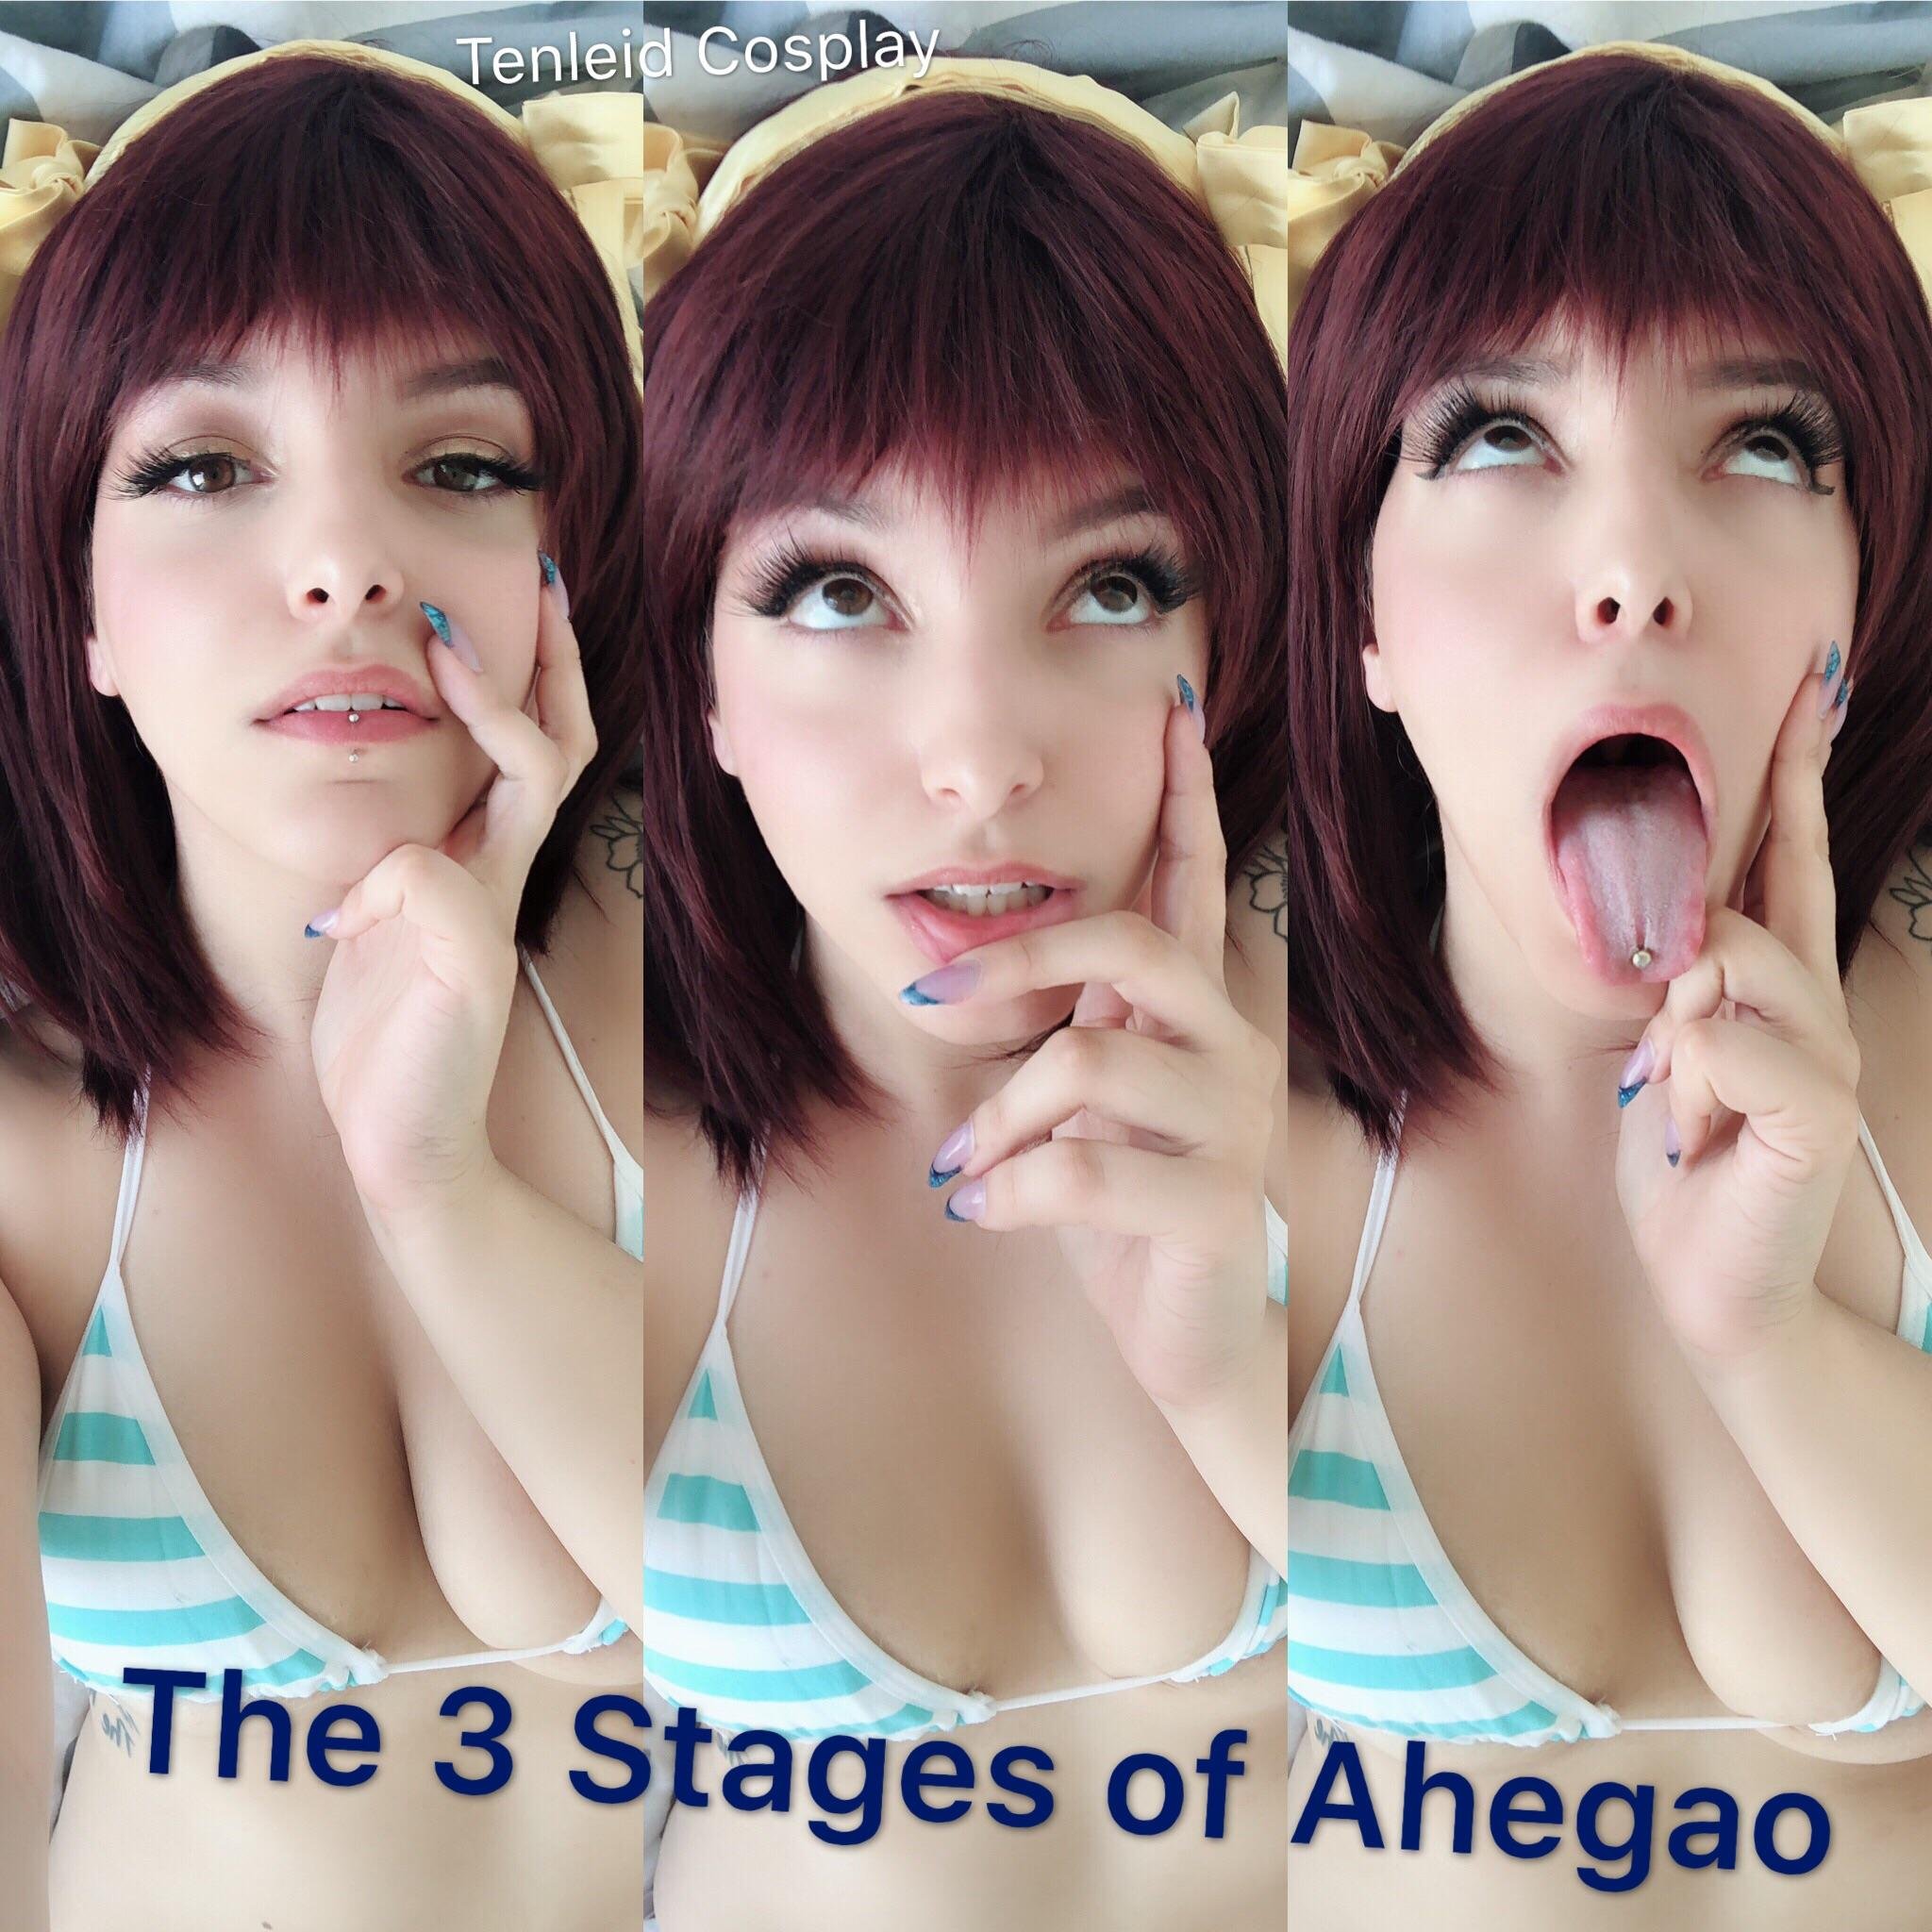 The 3 stages of ahegao - tenleid [self]